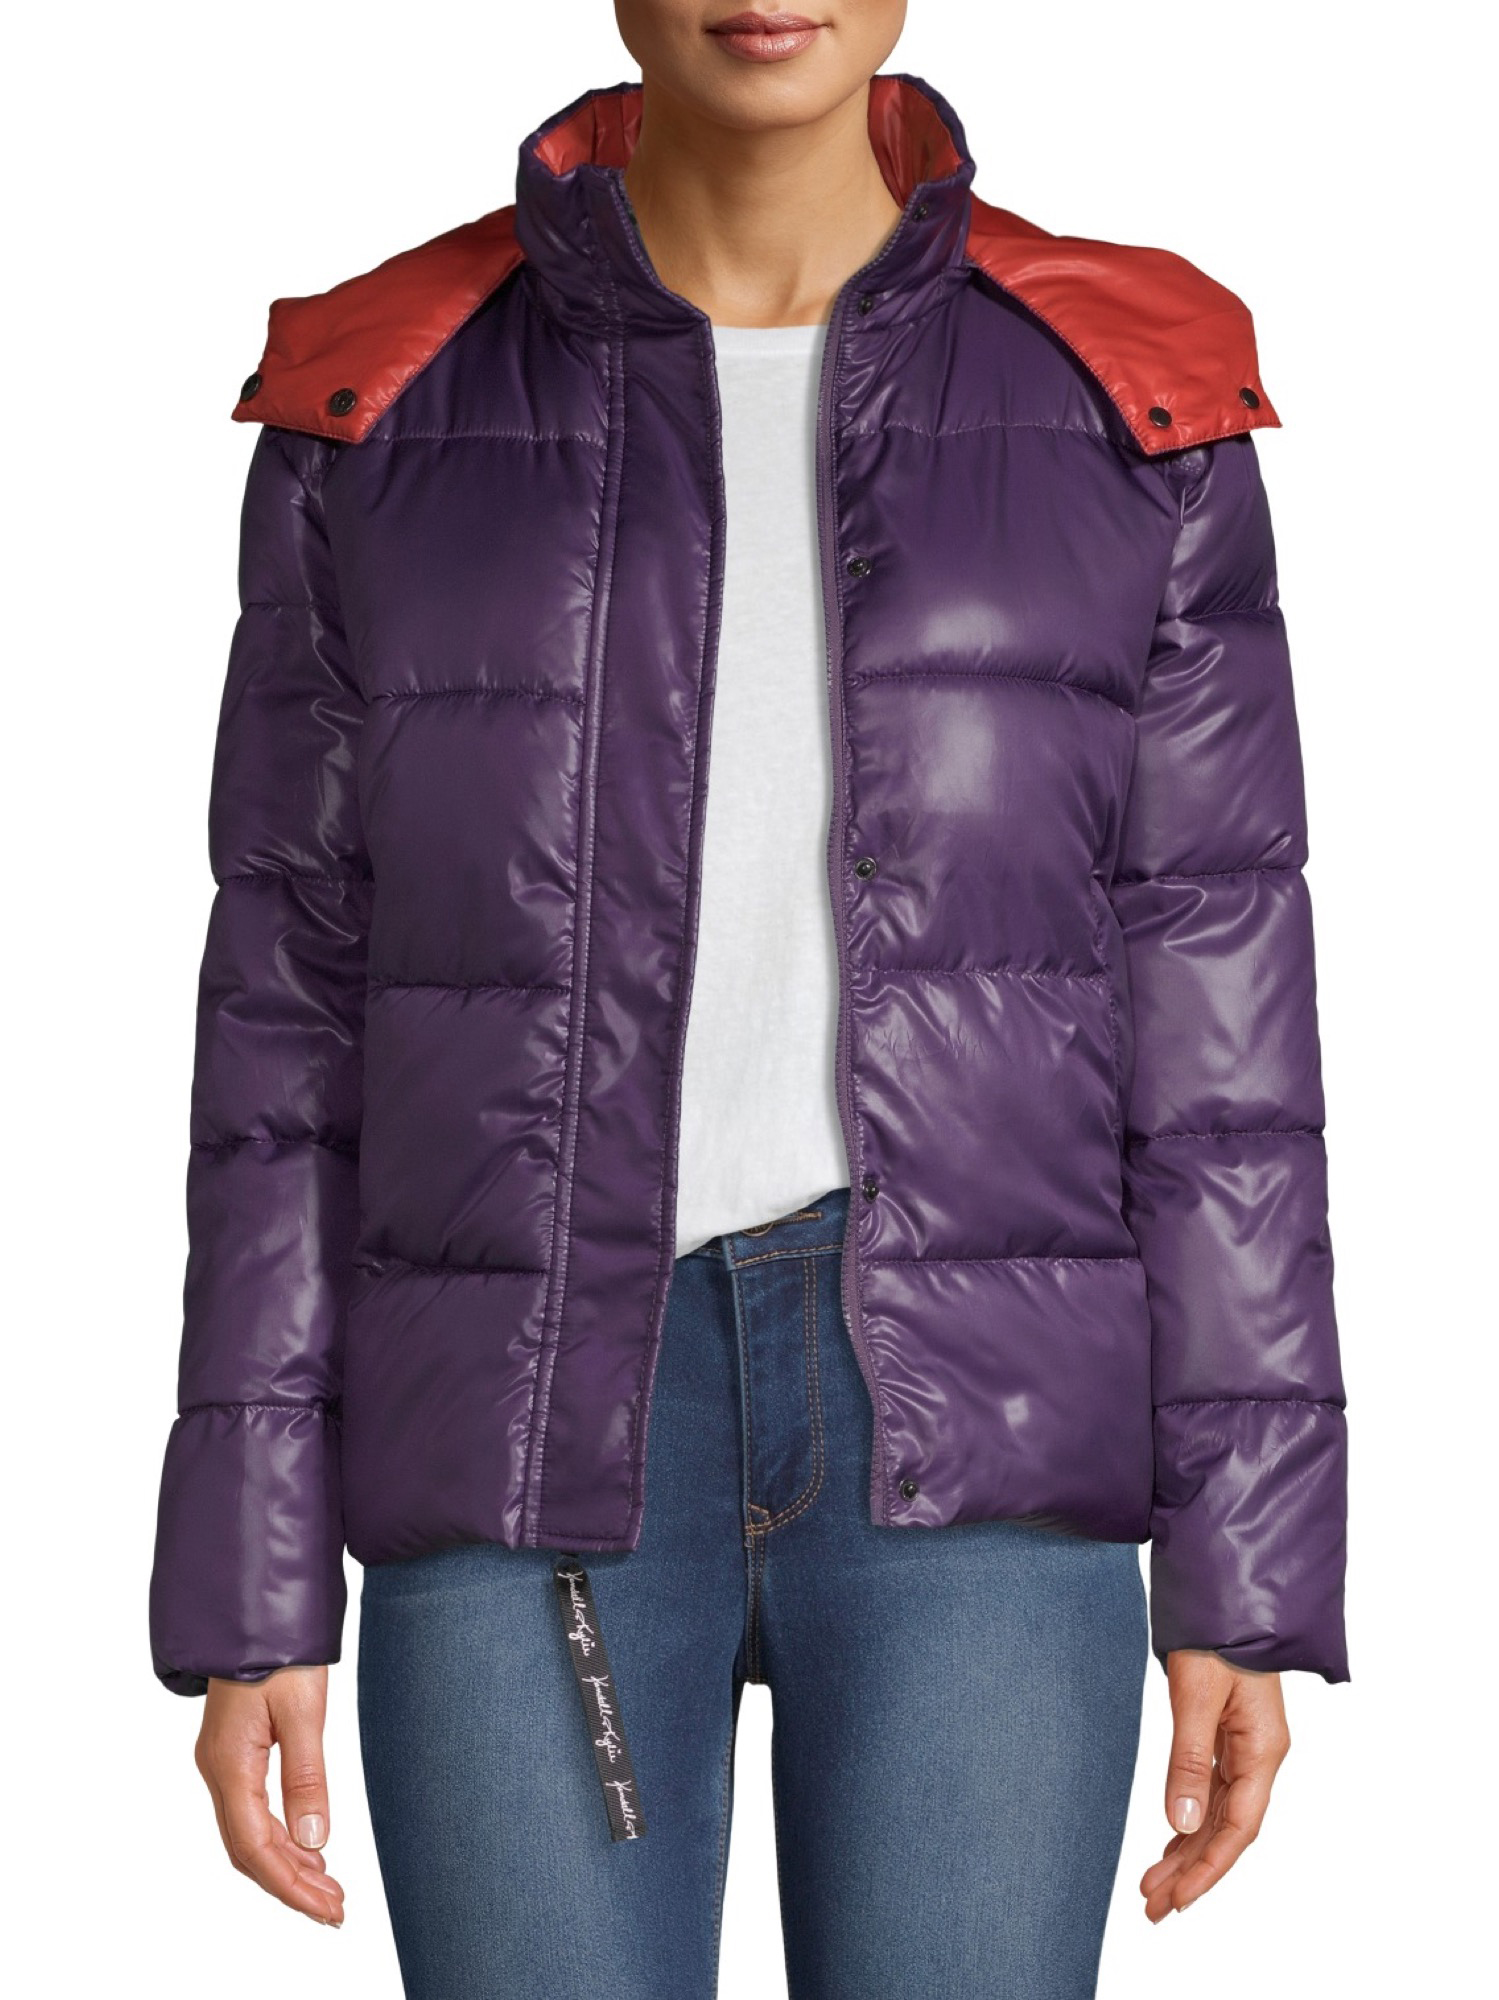 Kendall + Kylie Women's Two Tone Puffer - image 1 of 6